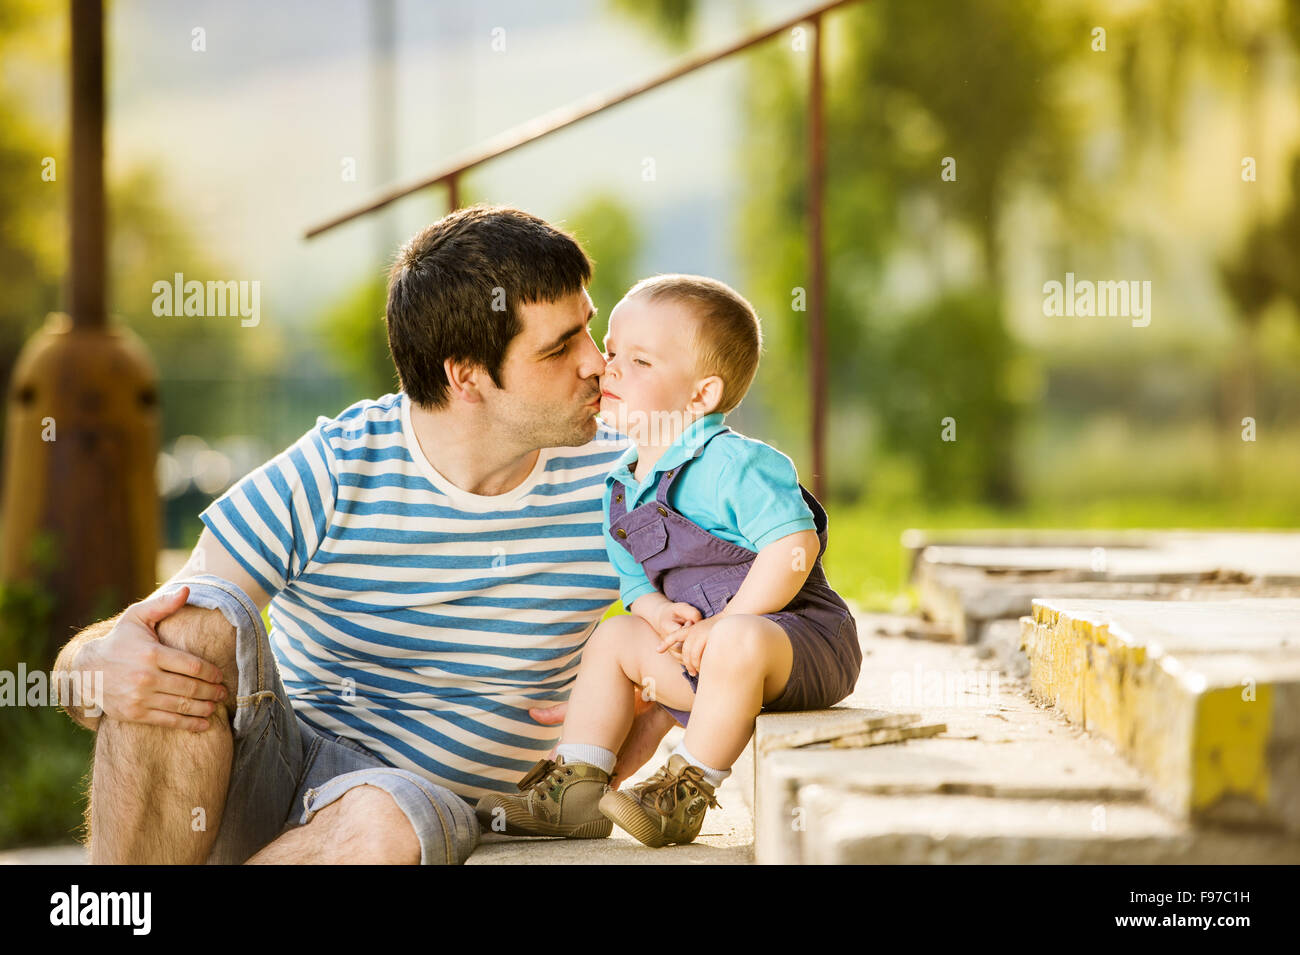 Outdoor portrait of young father kissing his little son Stock Photo